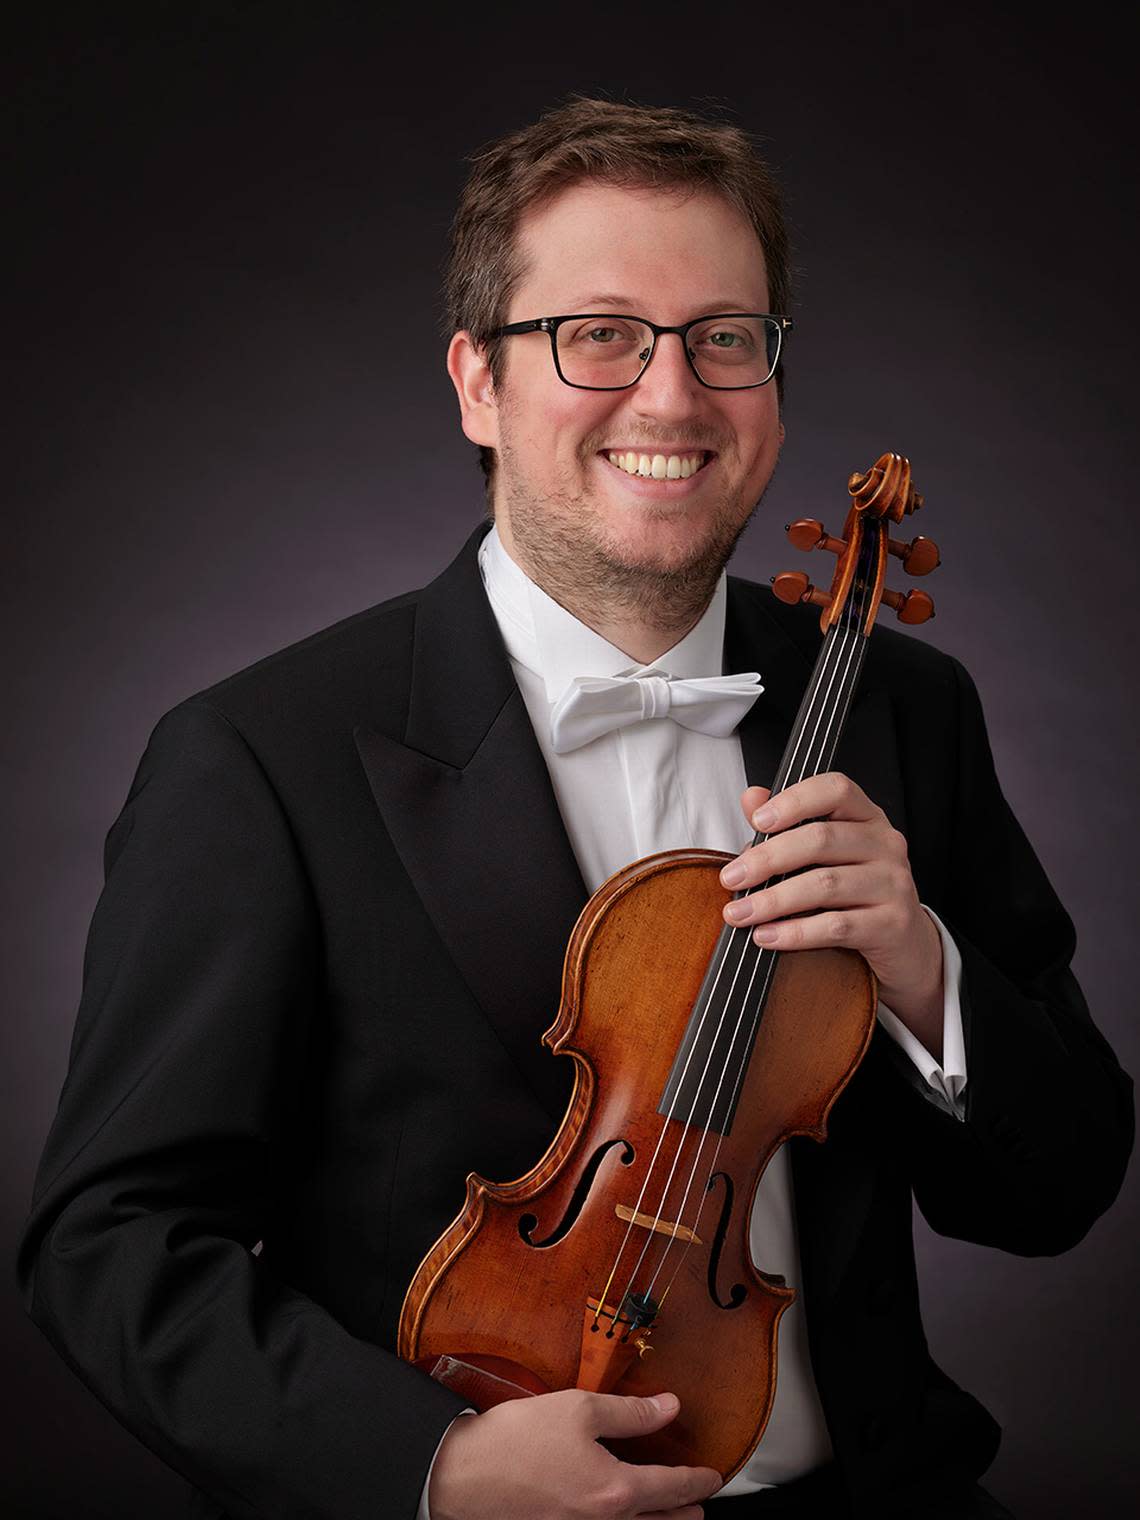 Violinist David Radzynski, former concertmaster of the Cleveland Orchestra, will return for a recital March 14.